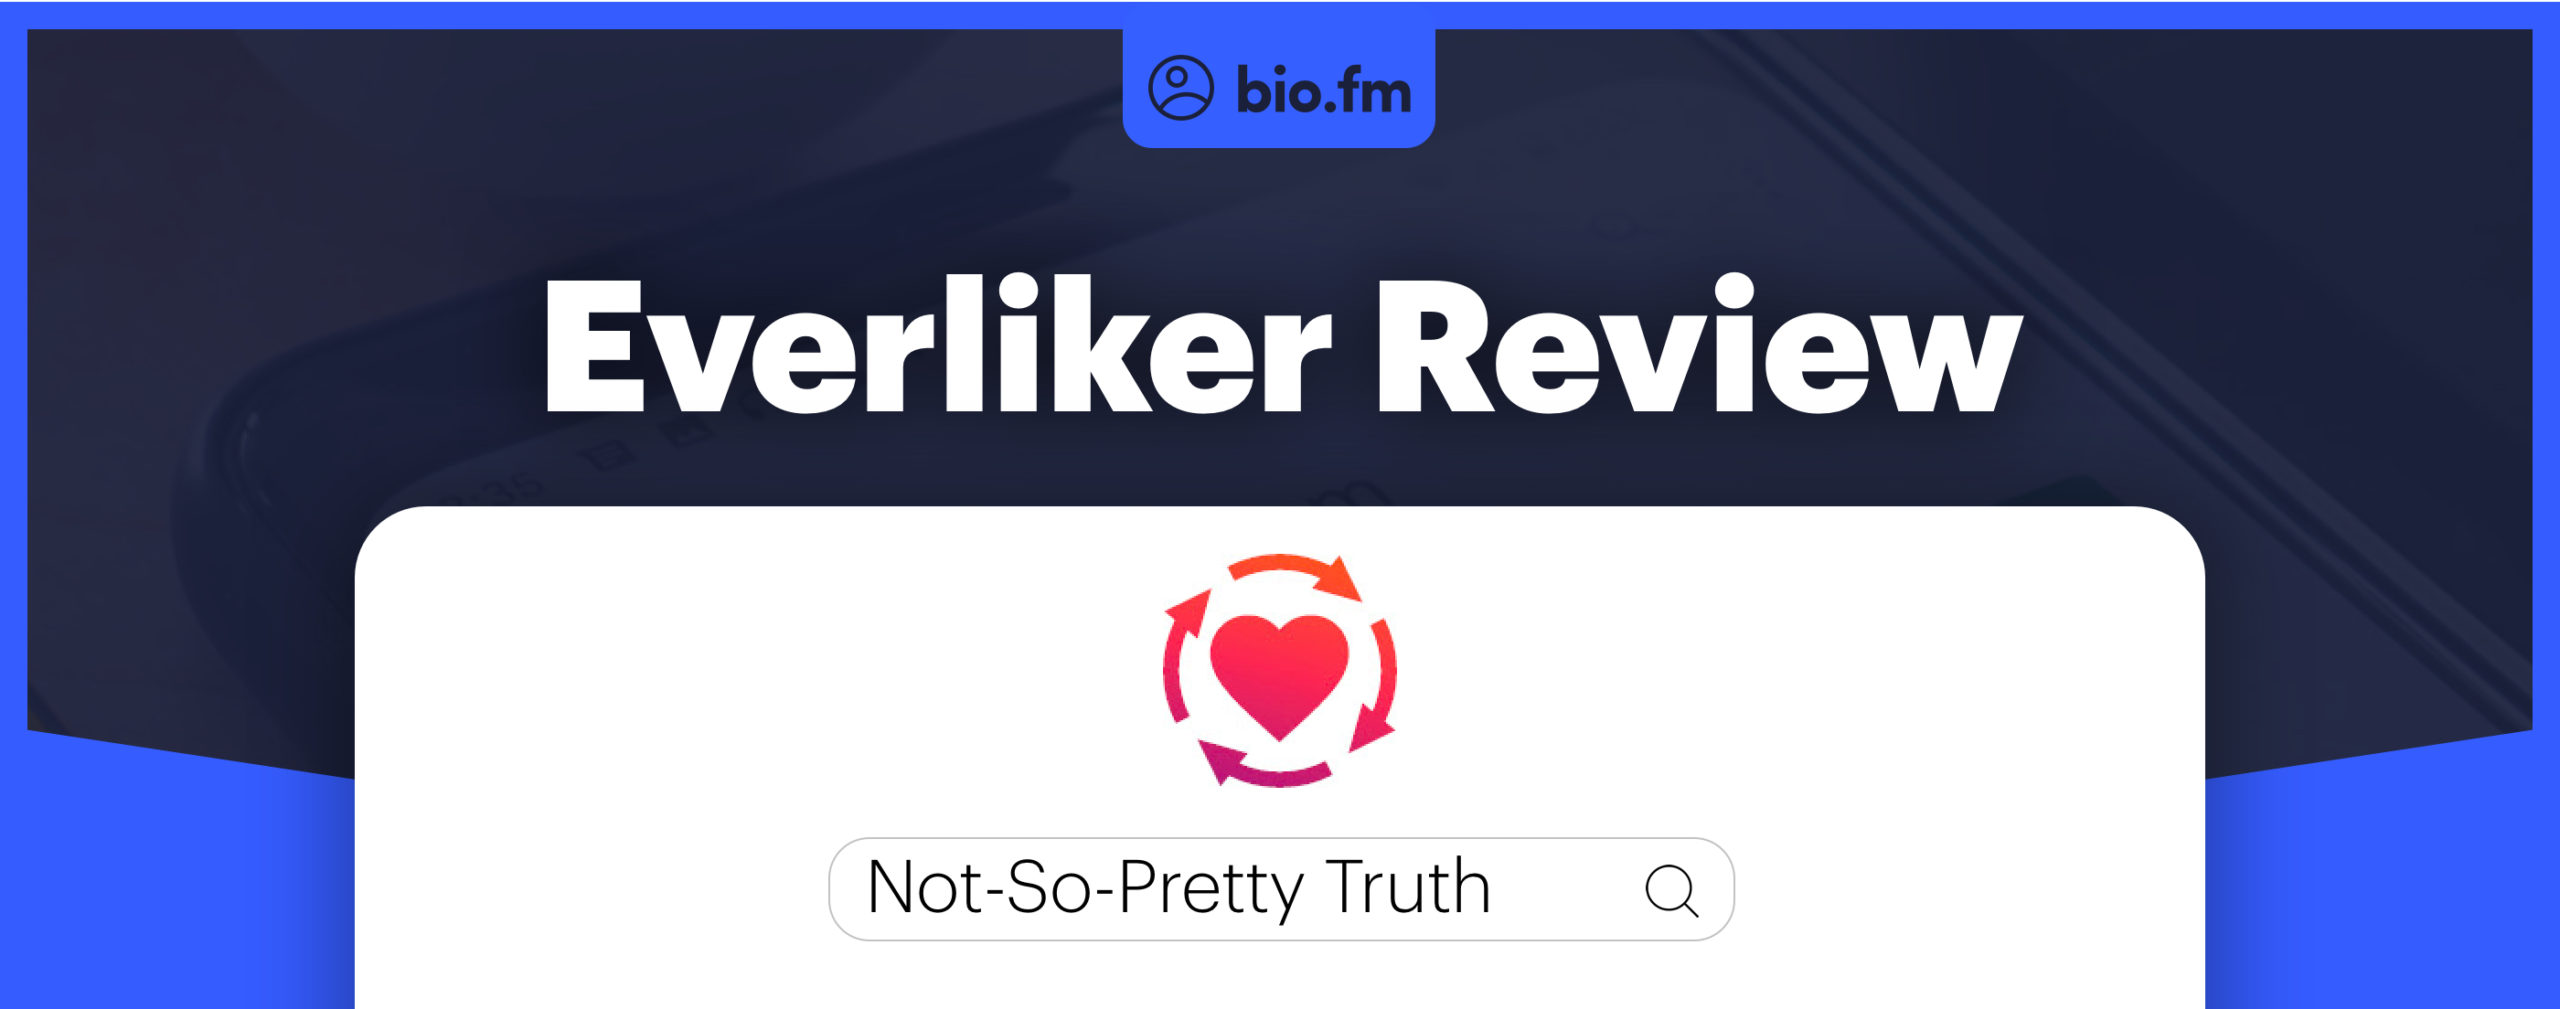 everliker review featured image